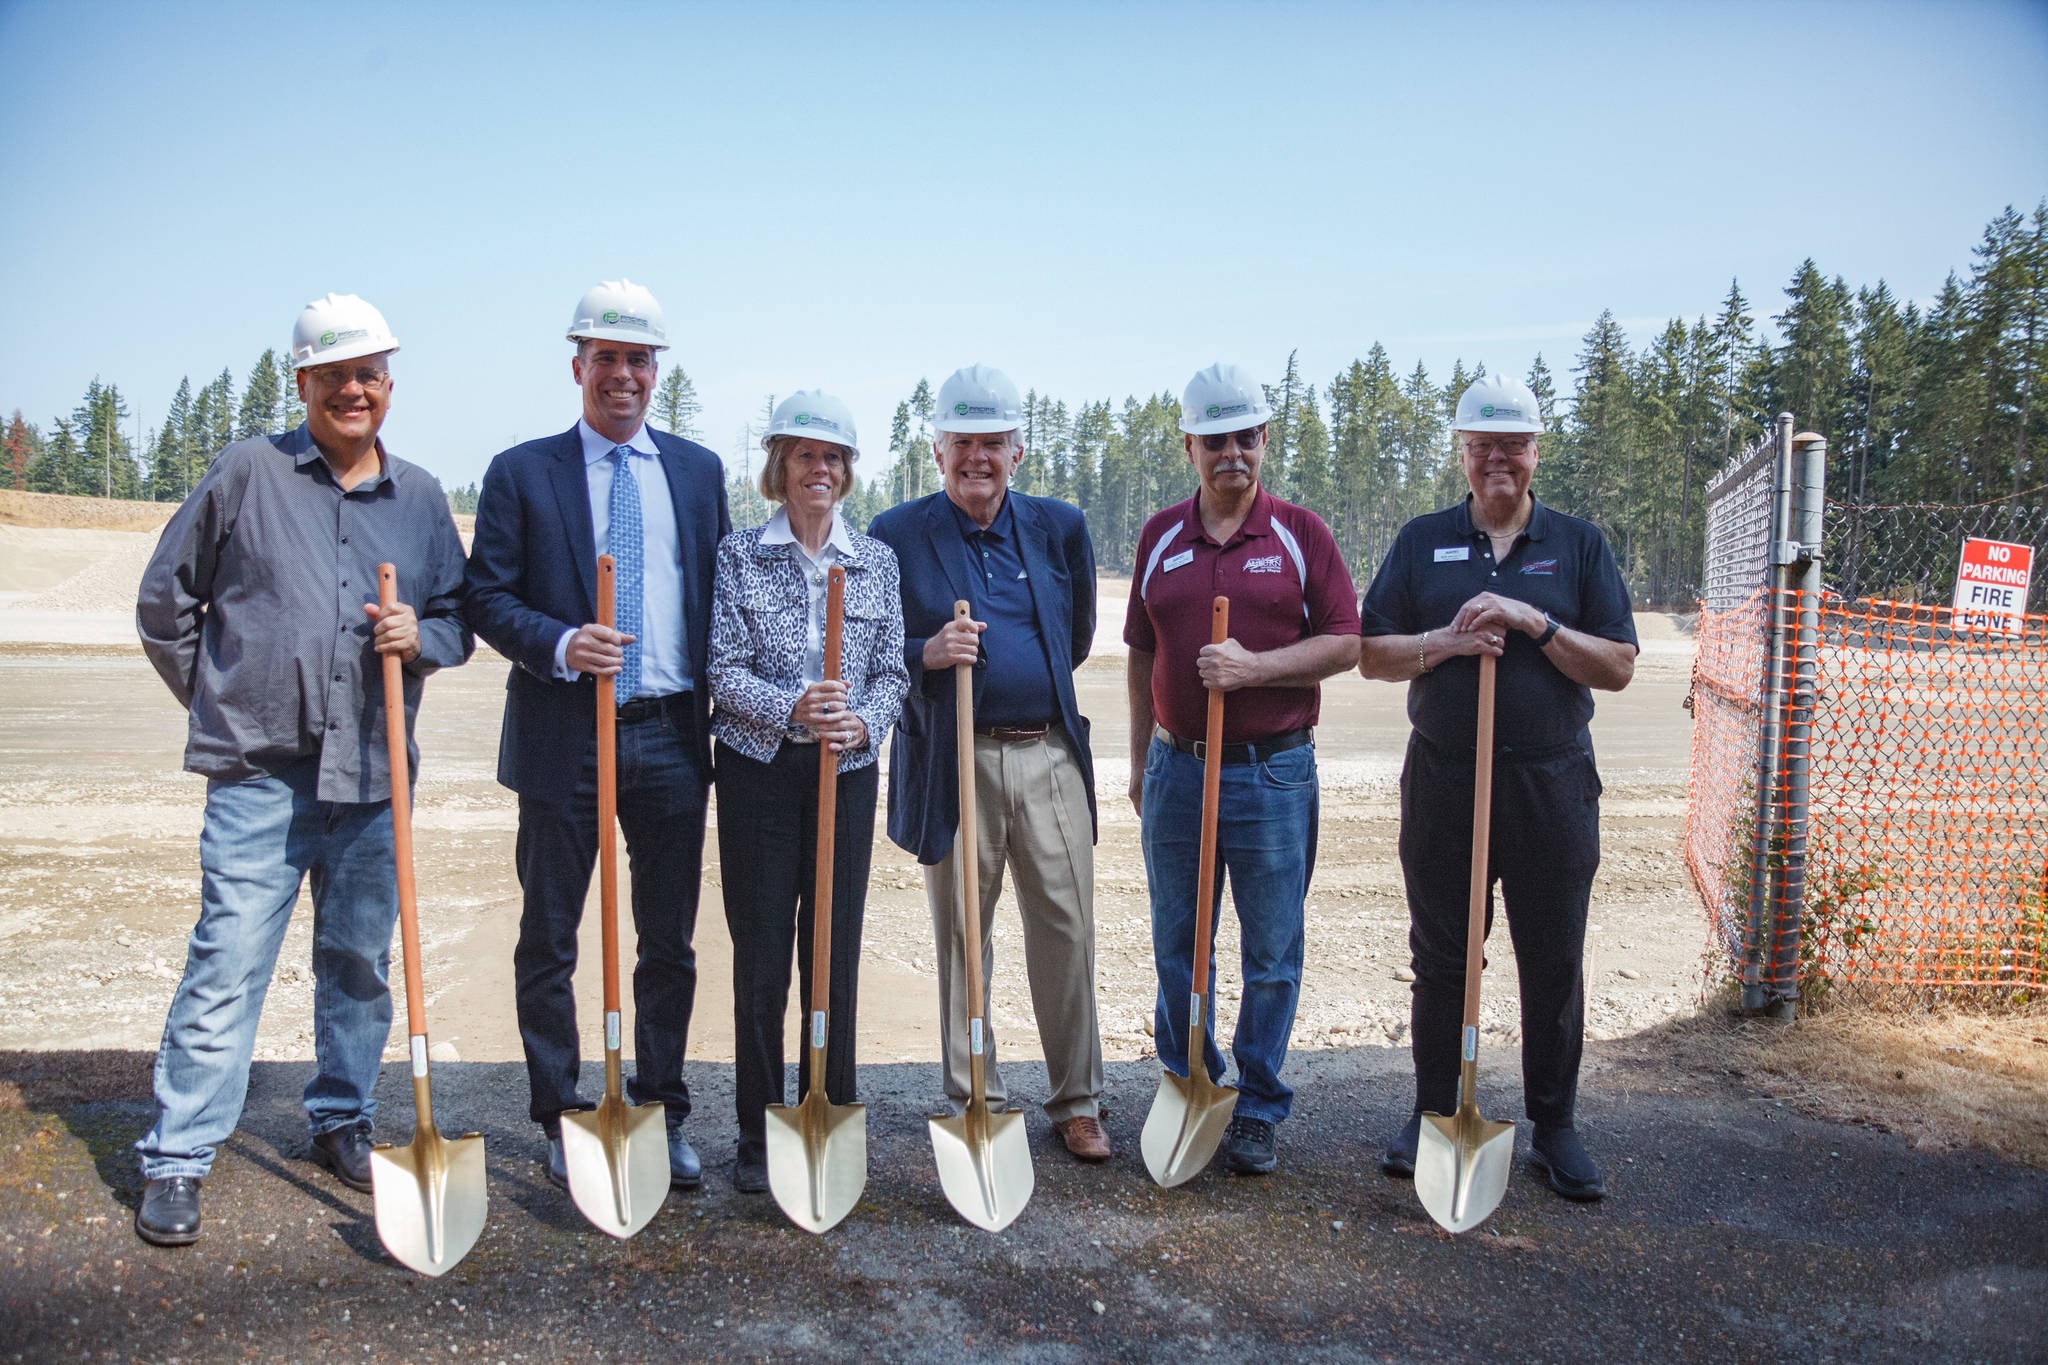 Auburn City Councilmembers Claude DaCorsi and Bob Baggett pose for a photo with Pacific Raceways staff during the groundbreaking event on Wednesday, Aug. 18, 2021. Photo by Henry Stewart-Wood/Sound Publishing